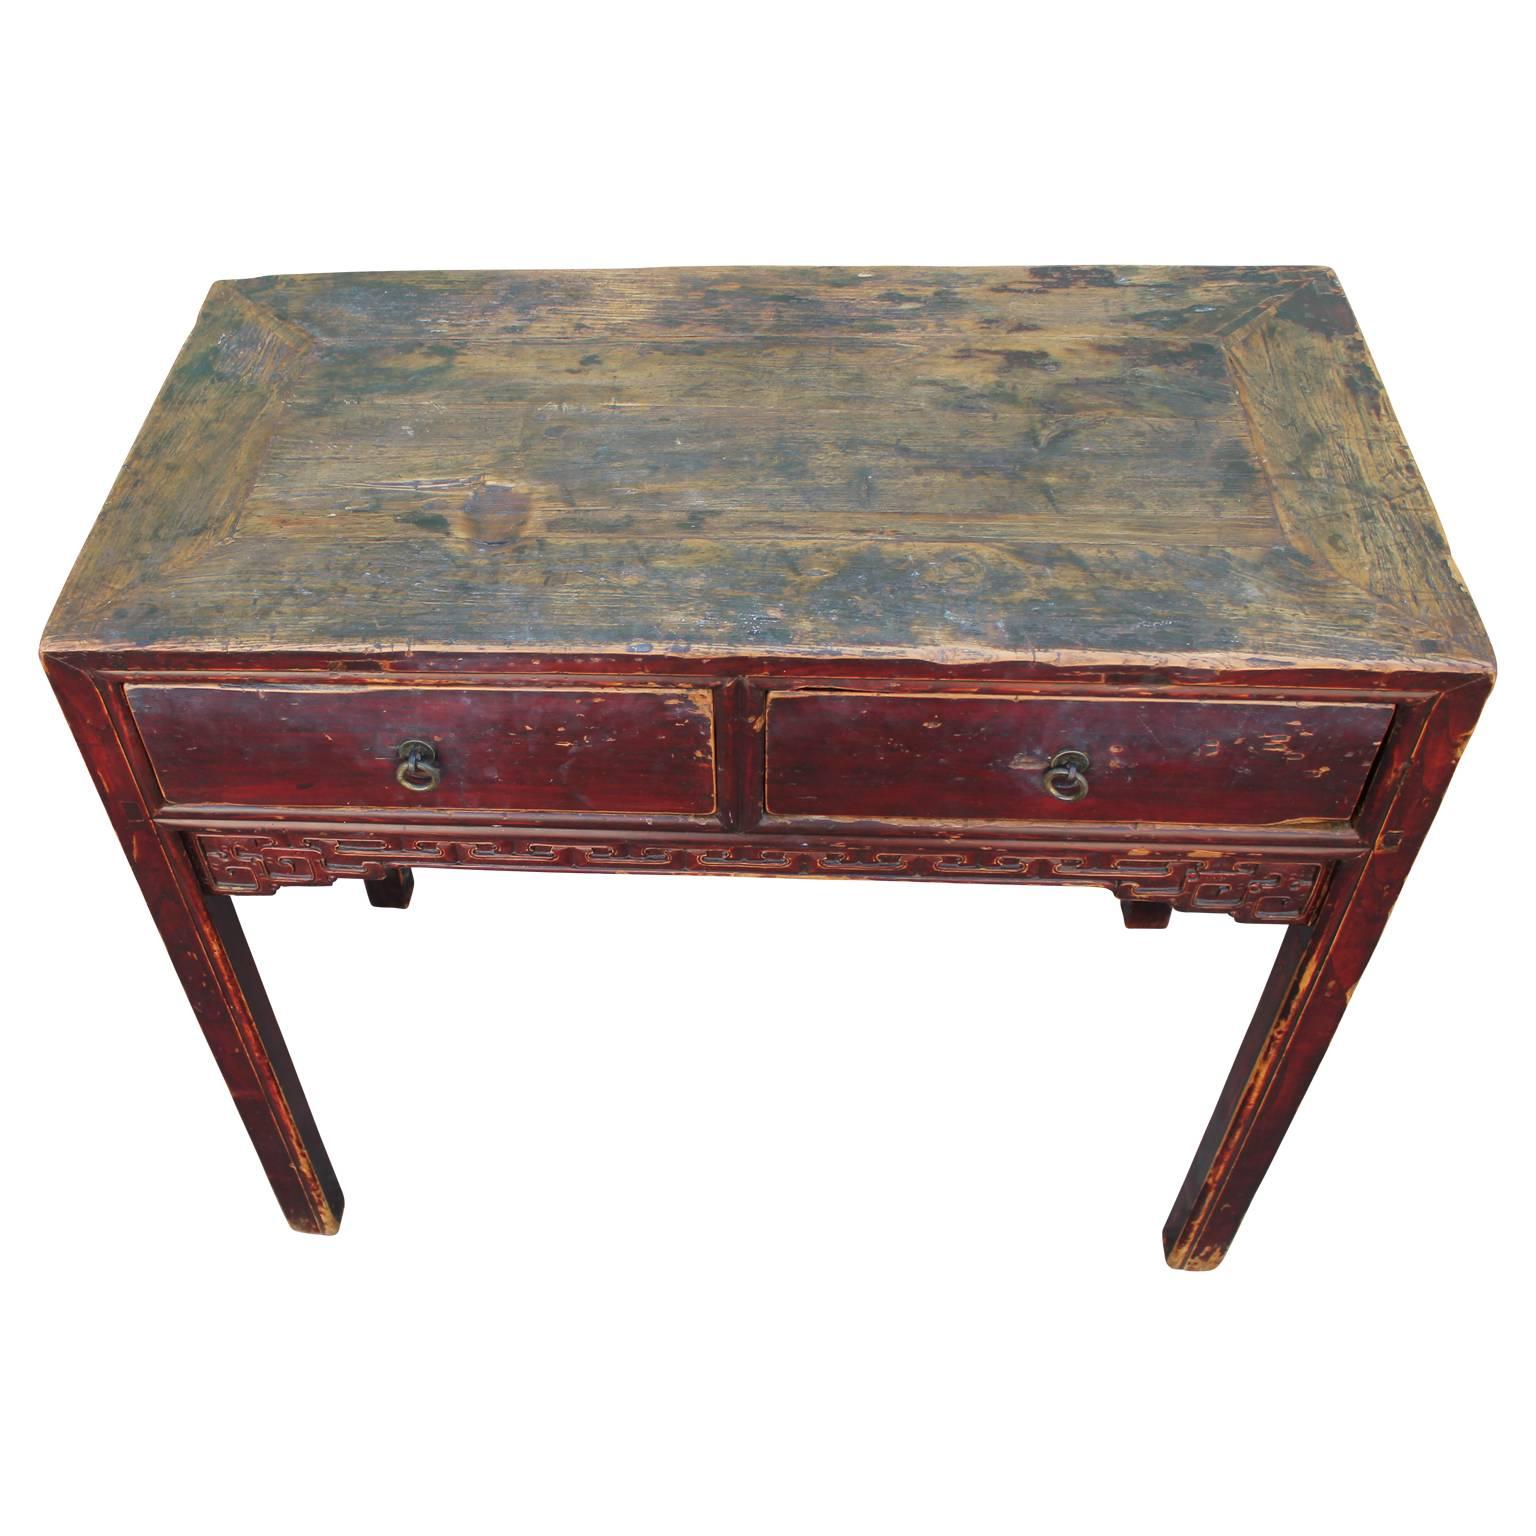 19th Century Red Lacquered Chinese Desk Altar Table with Carved Detailing 1